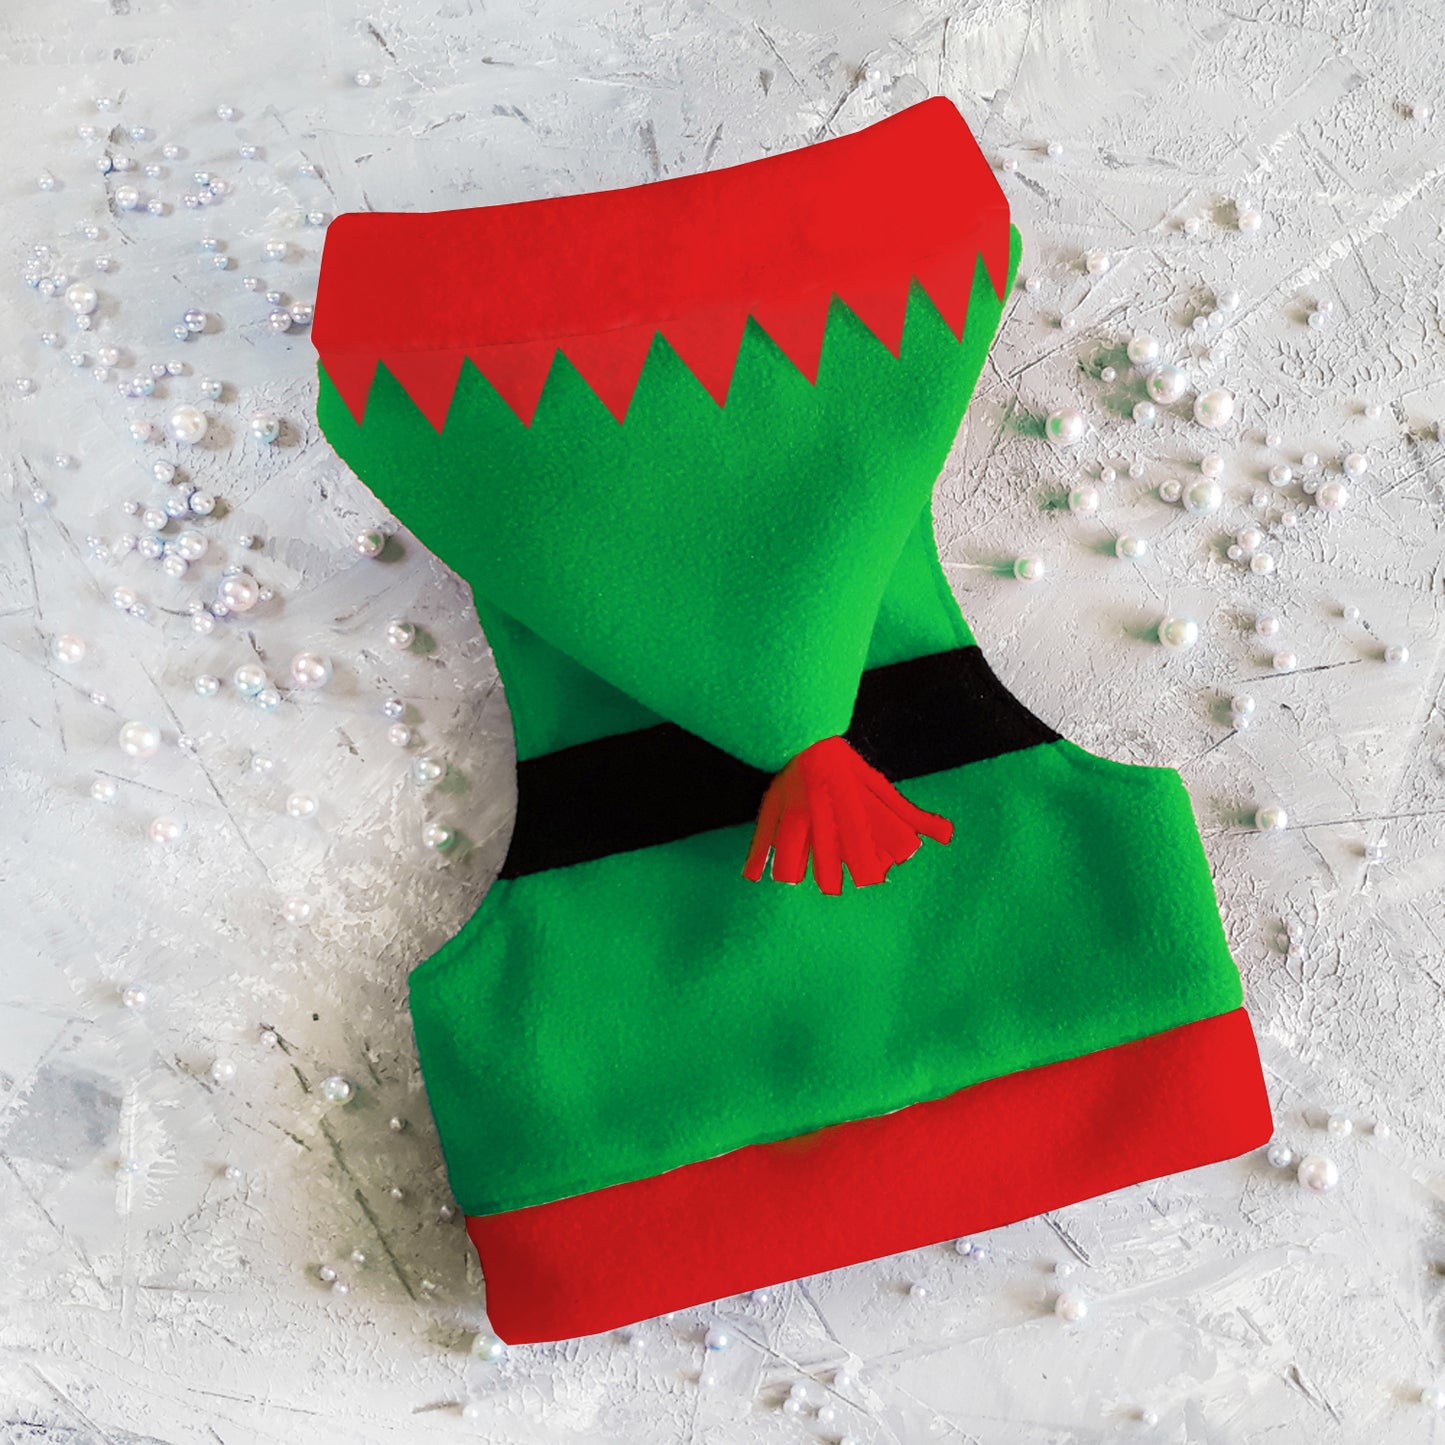 Difficult to escape green Elf cat harness. Christmas vest